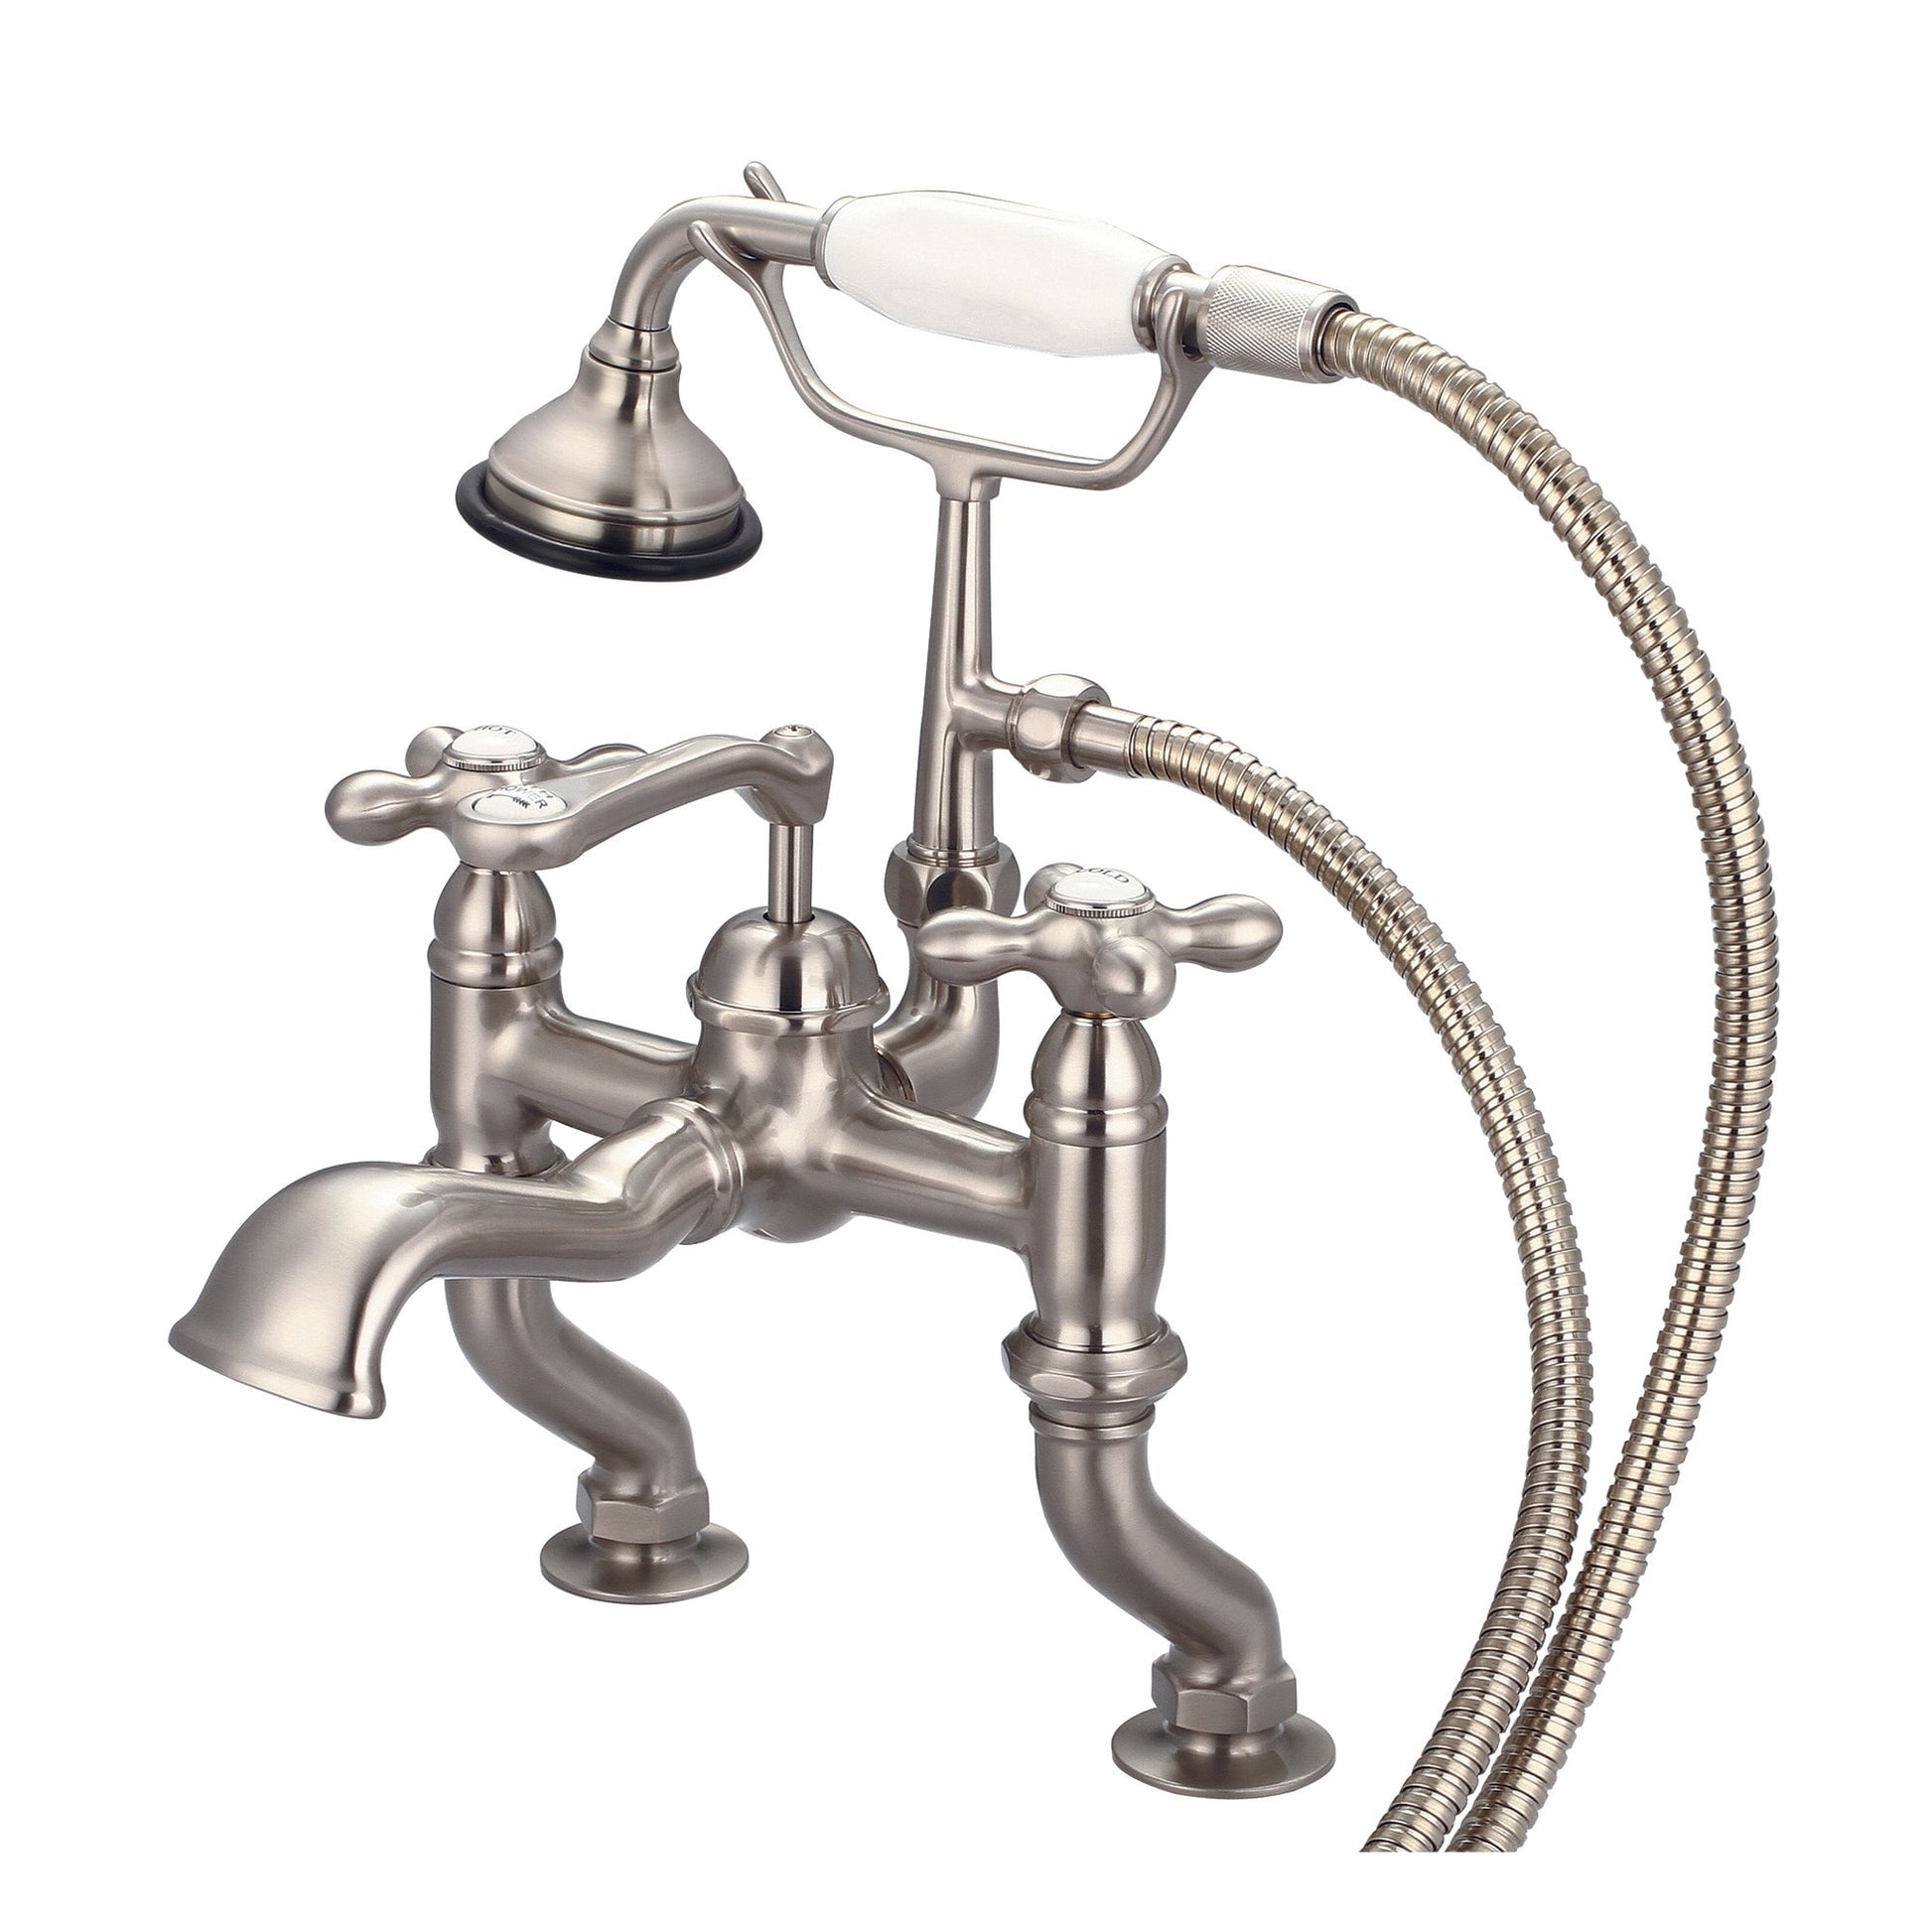 Water Creation Vintage Classic Adjustable Center Deck Mount Tub F6-0004 3.25" Grey Solid Brass Faucet With Handheld Shower And Metal Lever Handles, Hot And Cold Labels Included